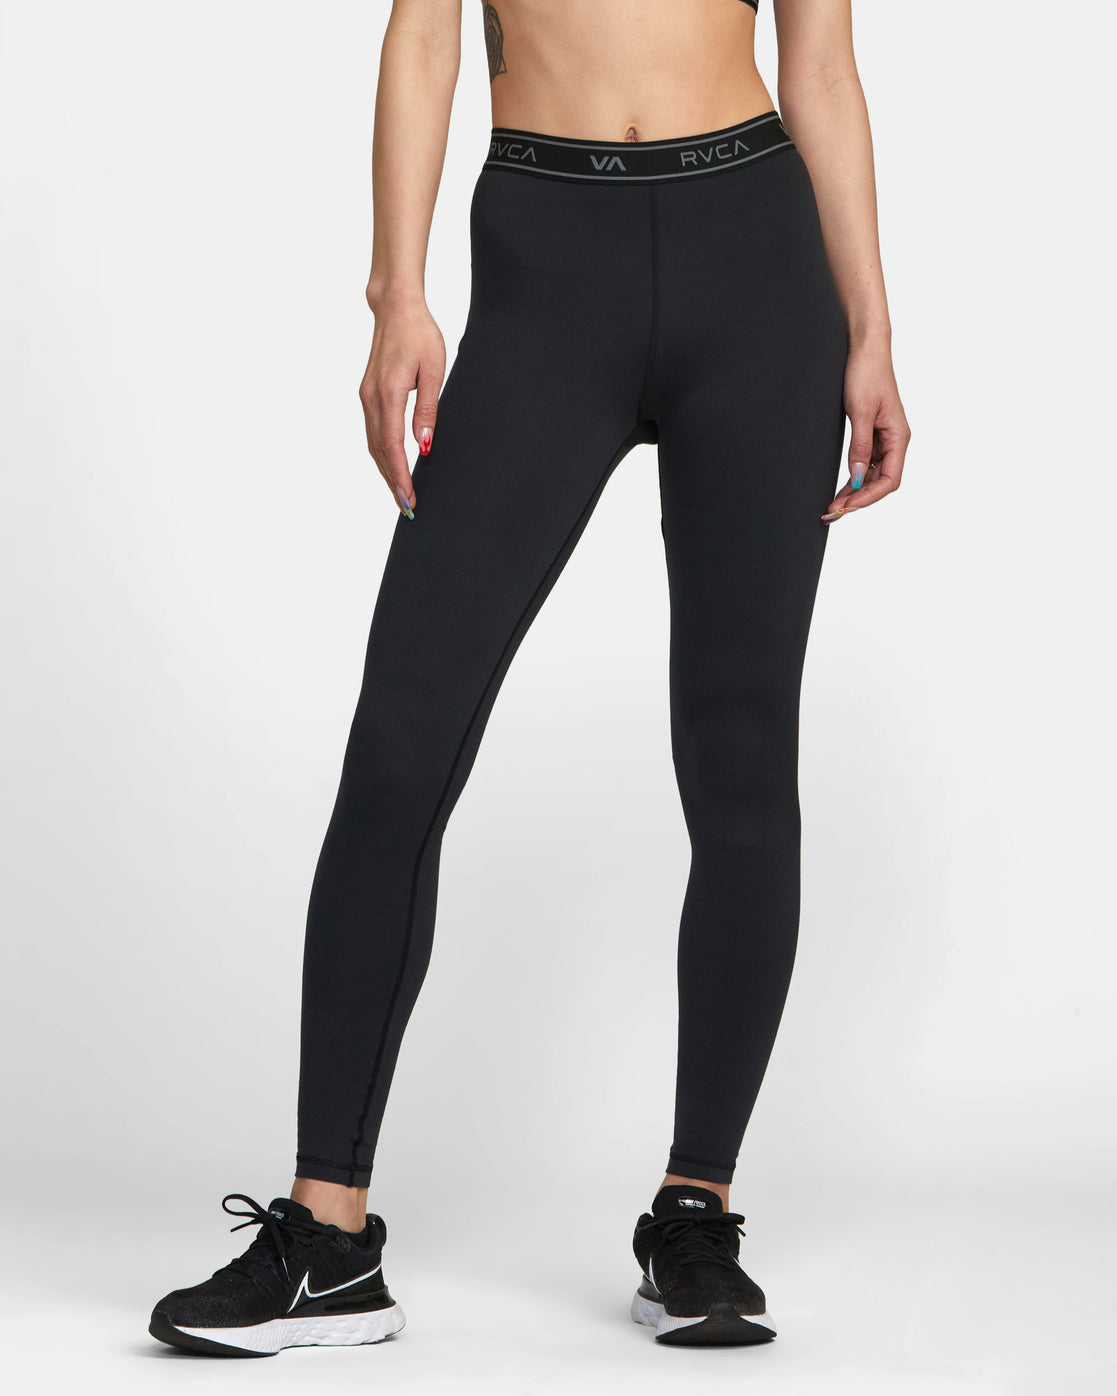 Black Micro-Ribbed High Waisted Pocket Leggings | Posh West Boutique